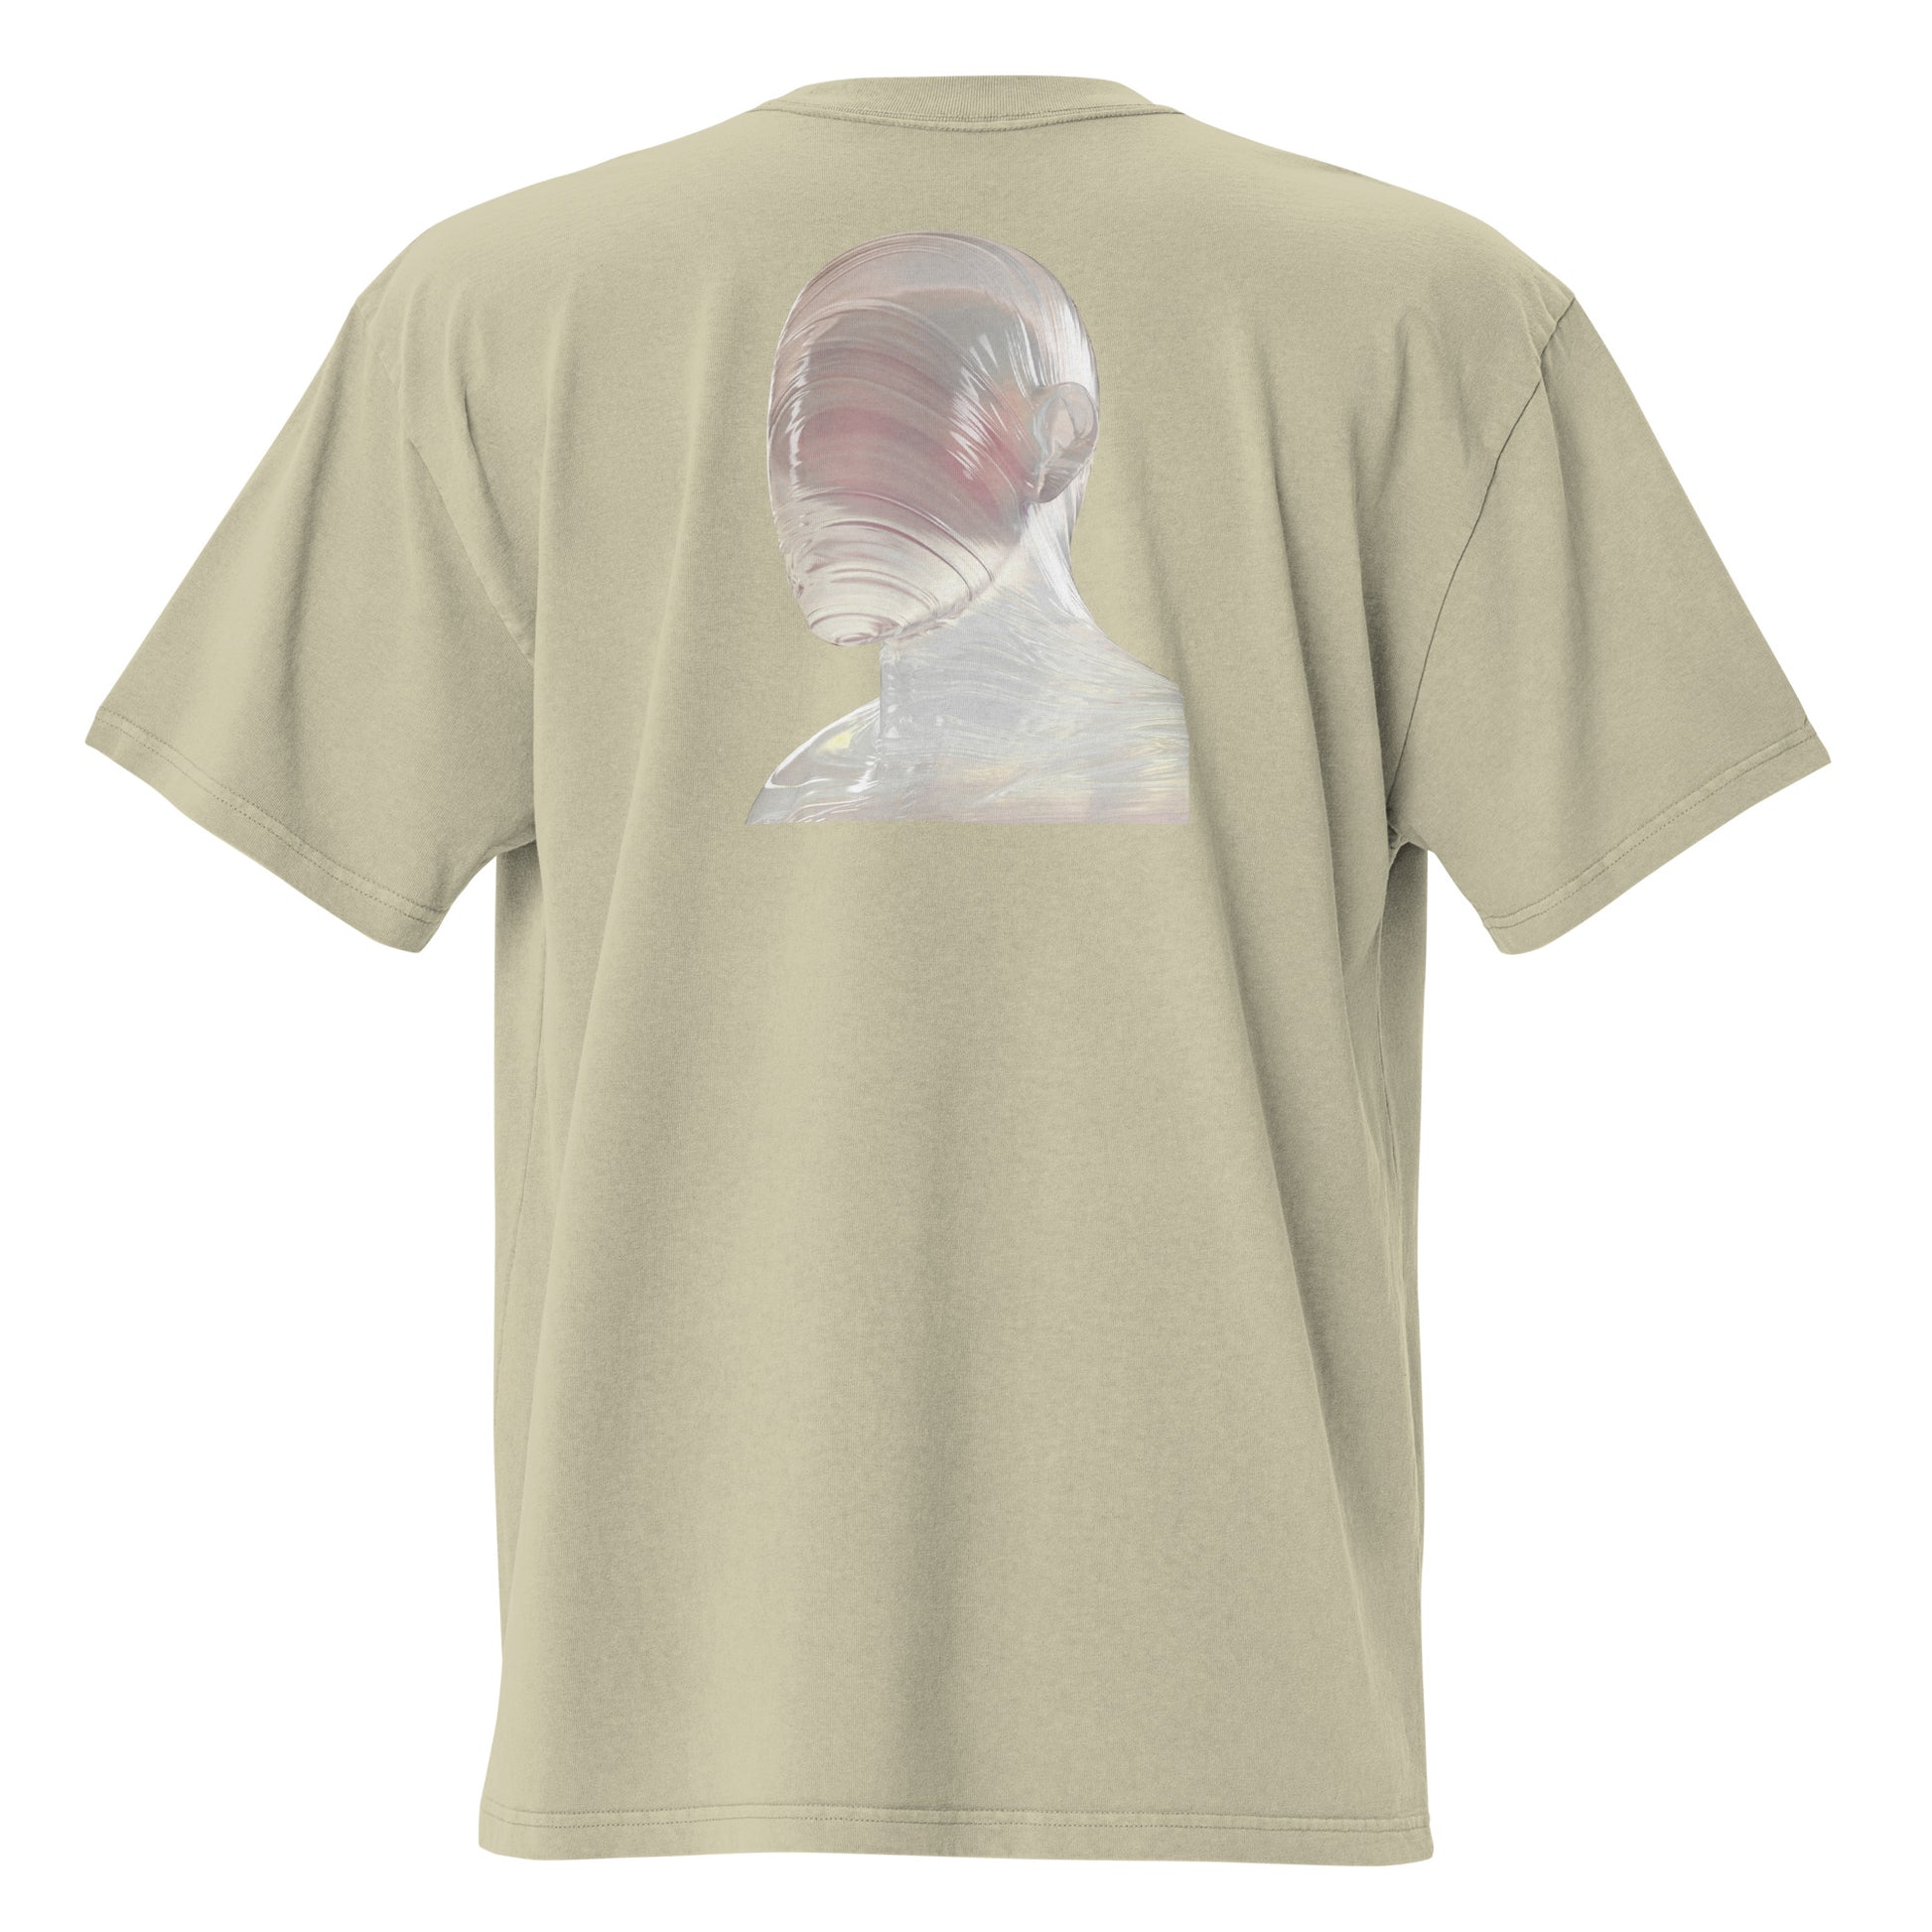 Faded Oversized Tee with Intriguing Woman Brain Graphic | ONLYZ3AL